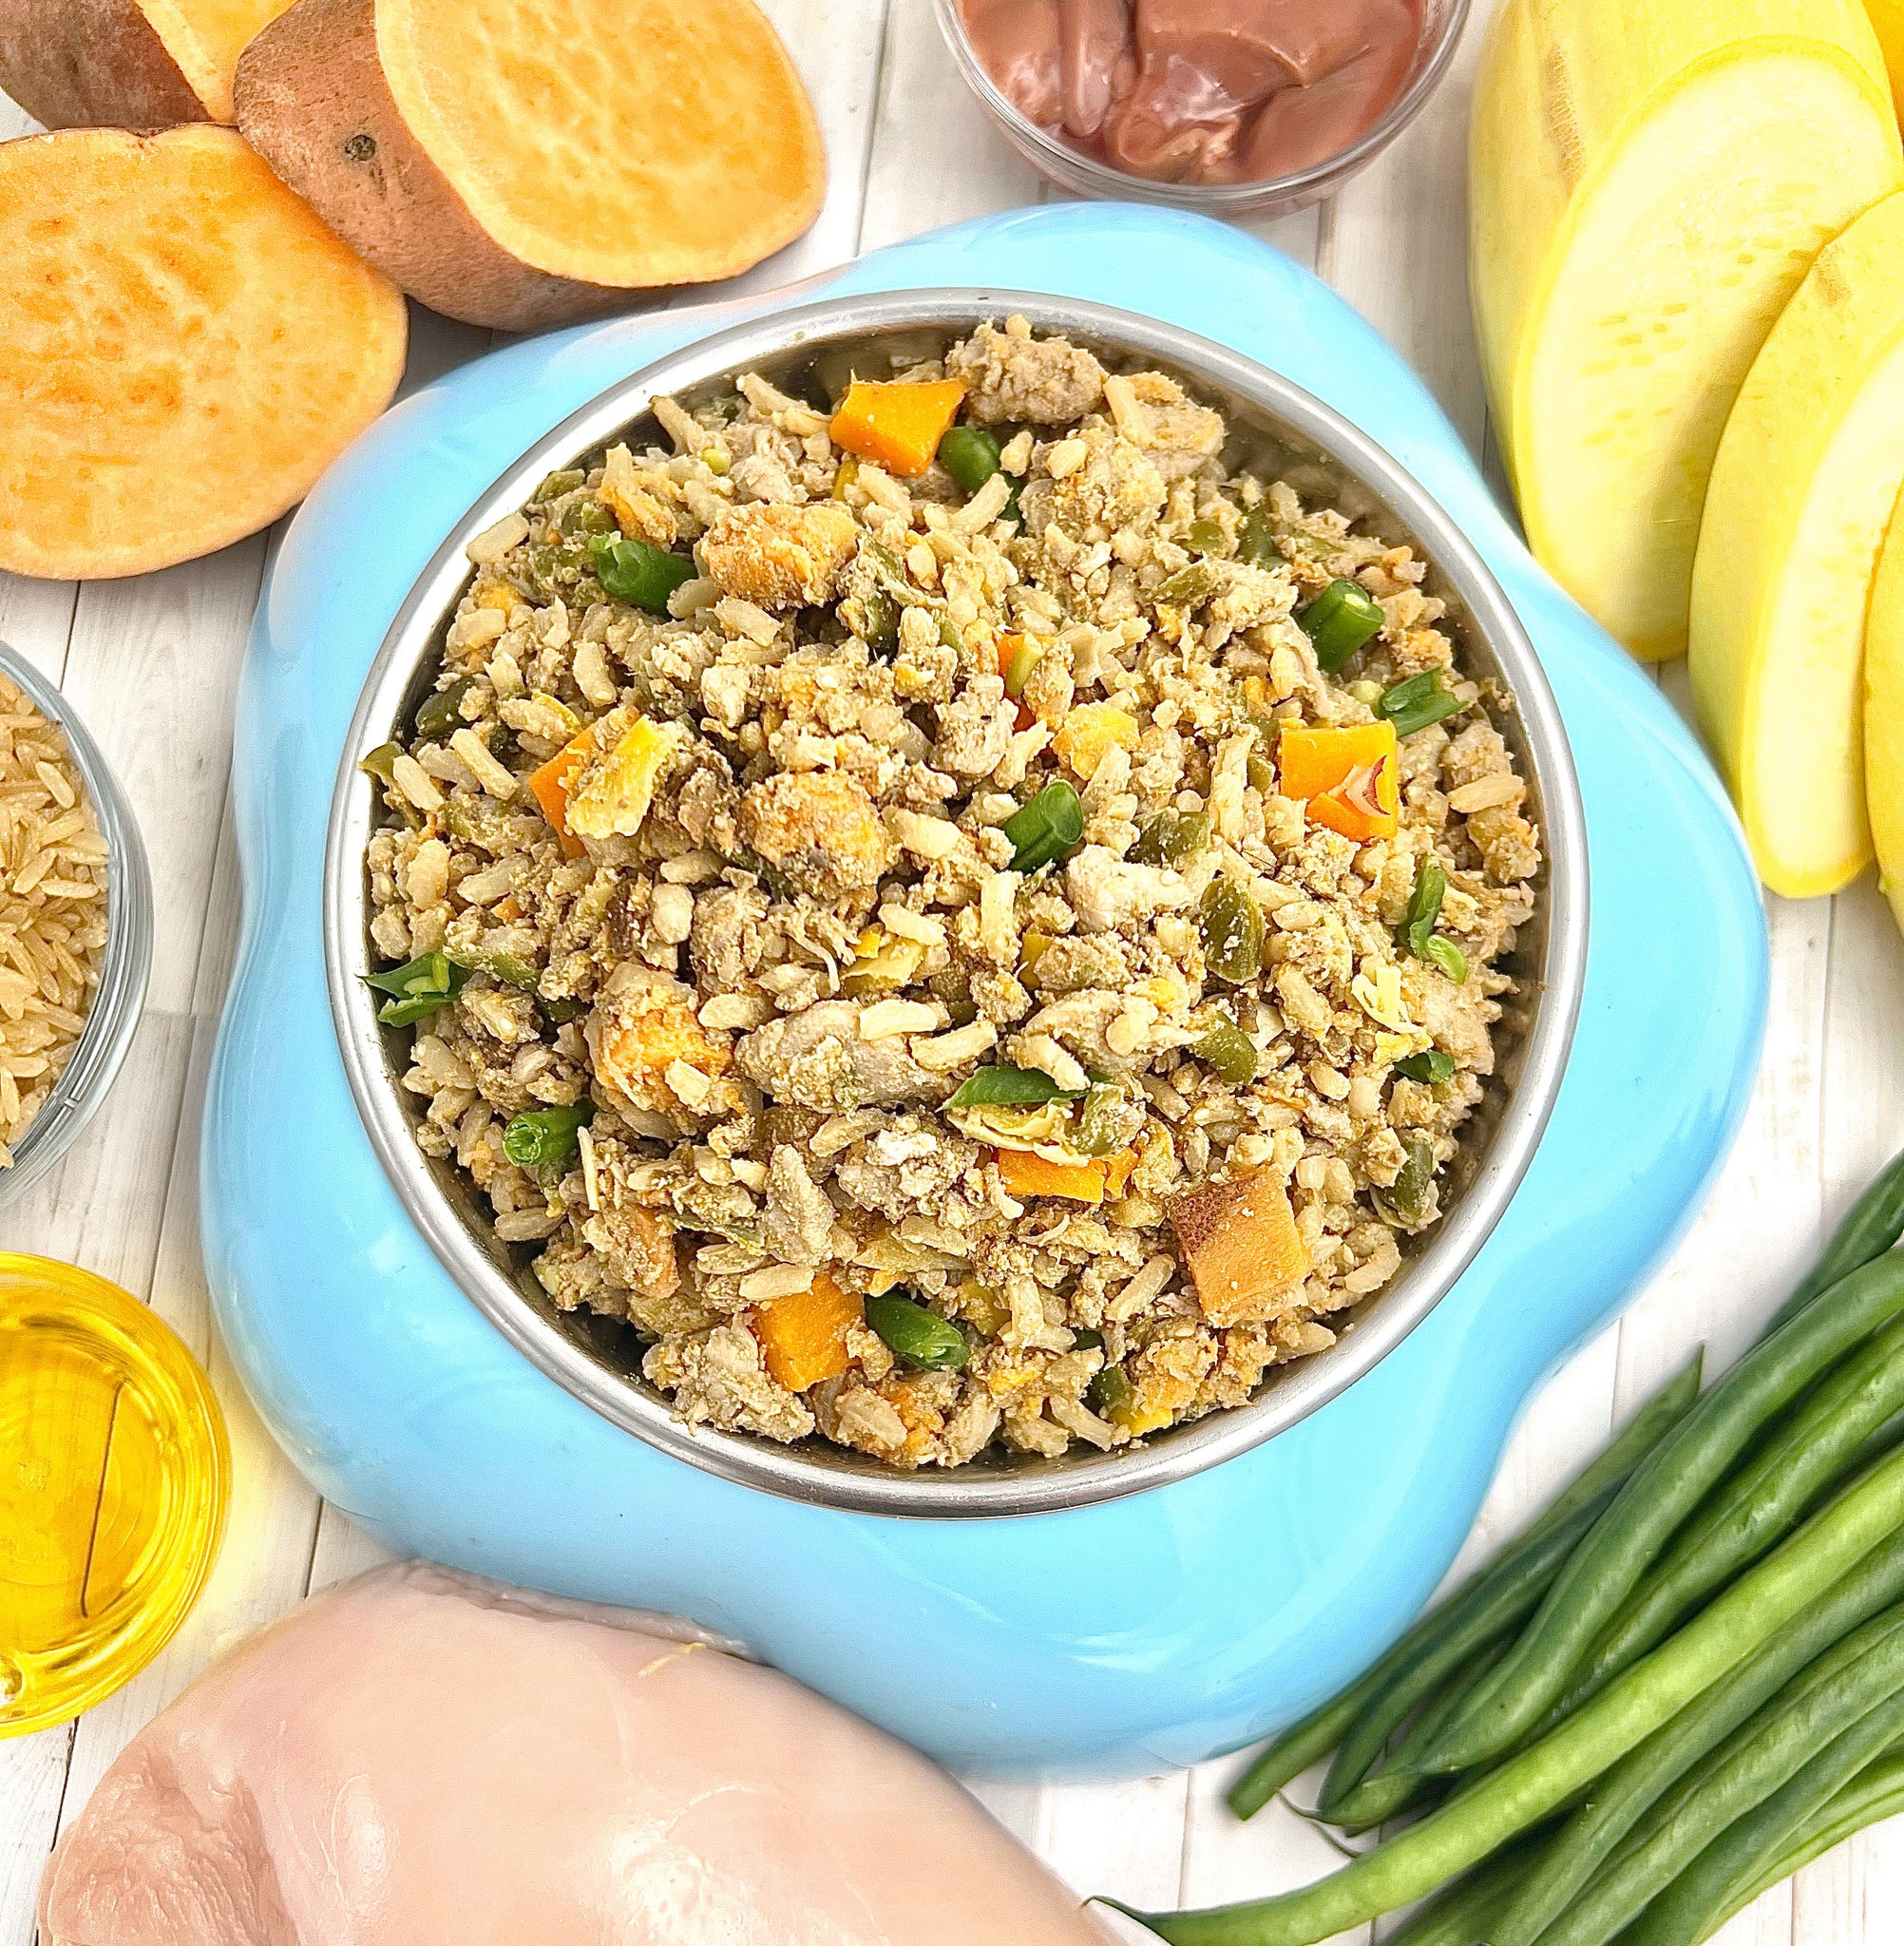 Islamorada Chicken & Brown Rice Cat Meal | Meals for Dogs